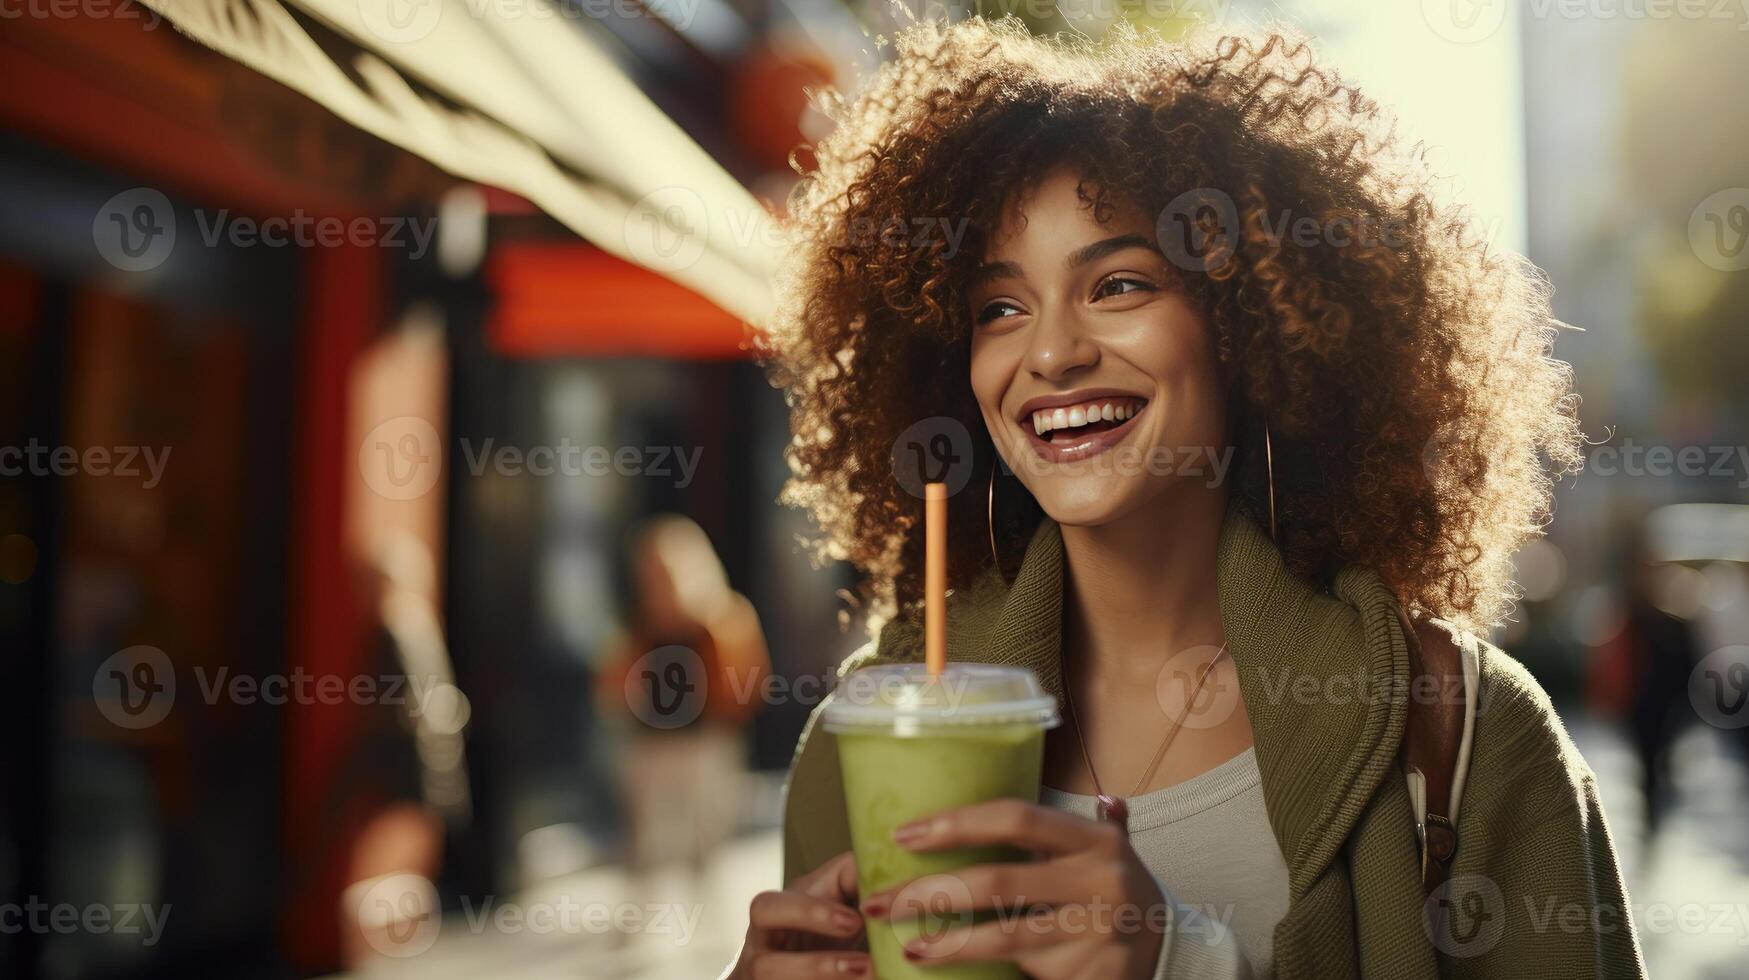 AI generated Satisfied Curly-Haired Woman Enjoying Healthy Detox Vegetable Smoothie Outdoors. Joyful Lady in Casual Jacket Smiling, Prioritizing a Nourishing Diet, and Leisurely Strolling in the City photo